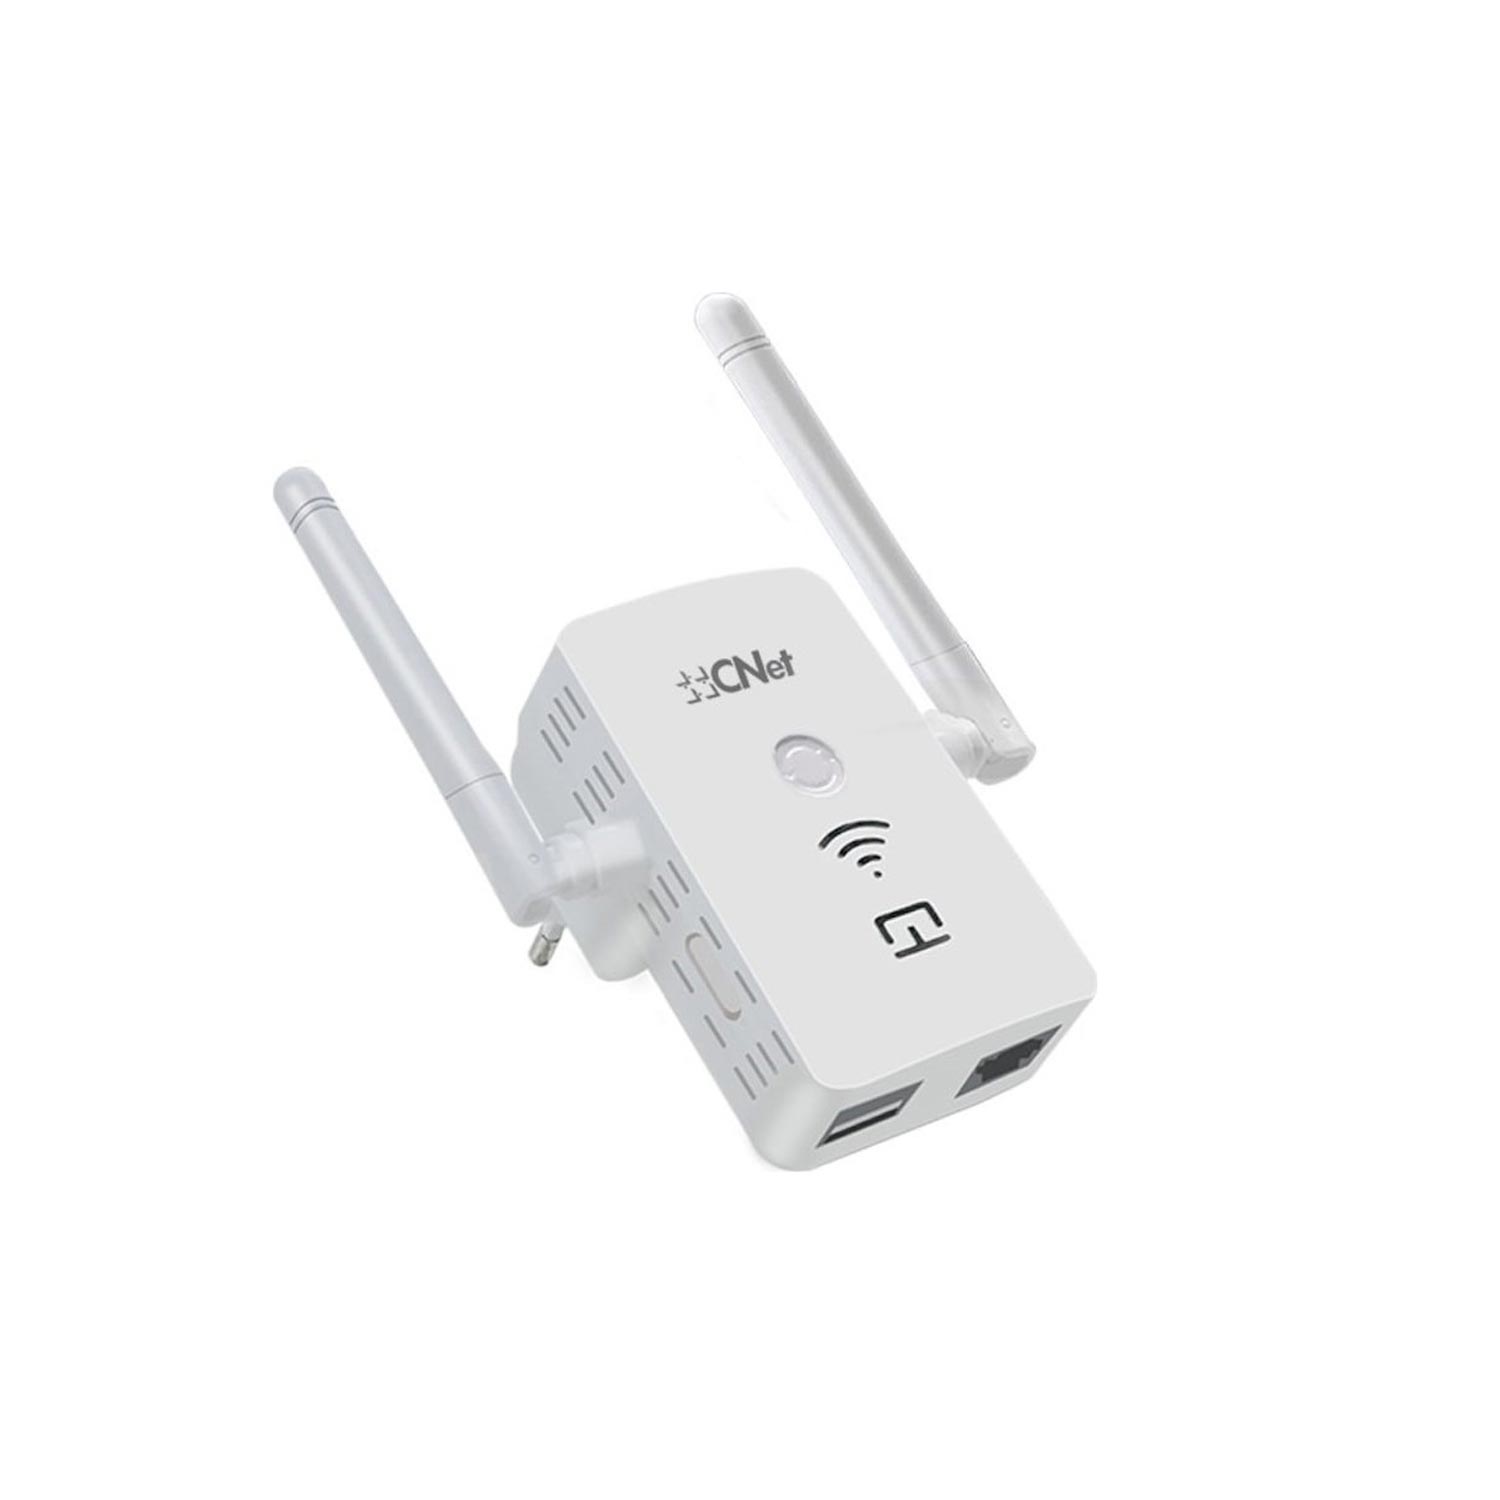 ACCESS POINT 300 MBPS REPEATER WİRELESS CNET-WNIX3300L